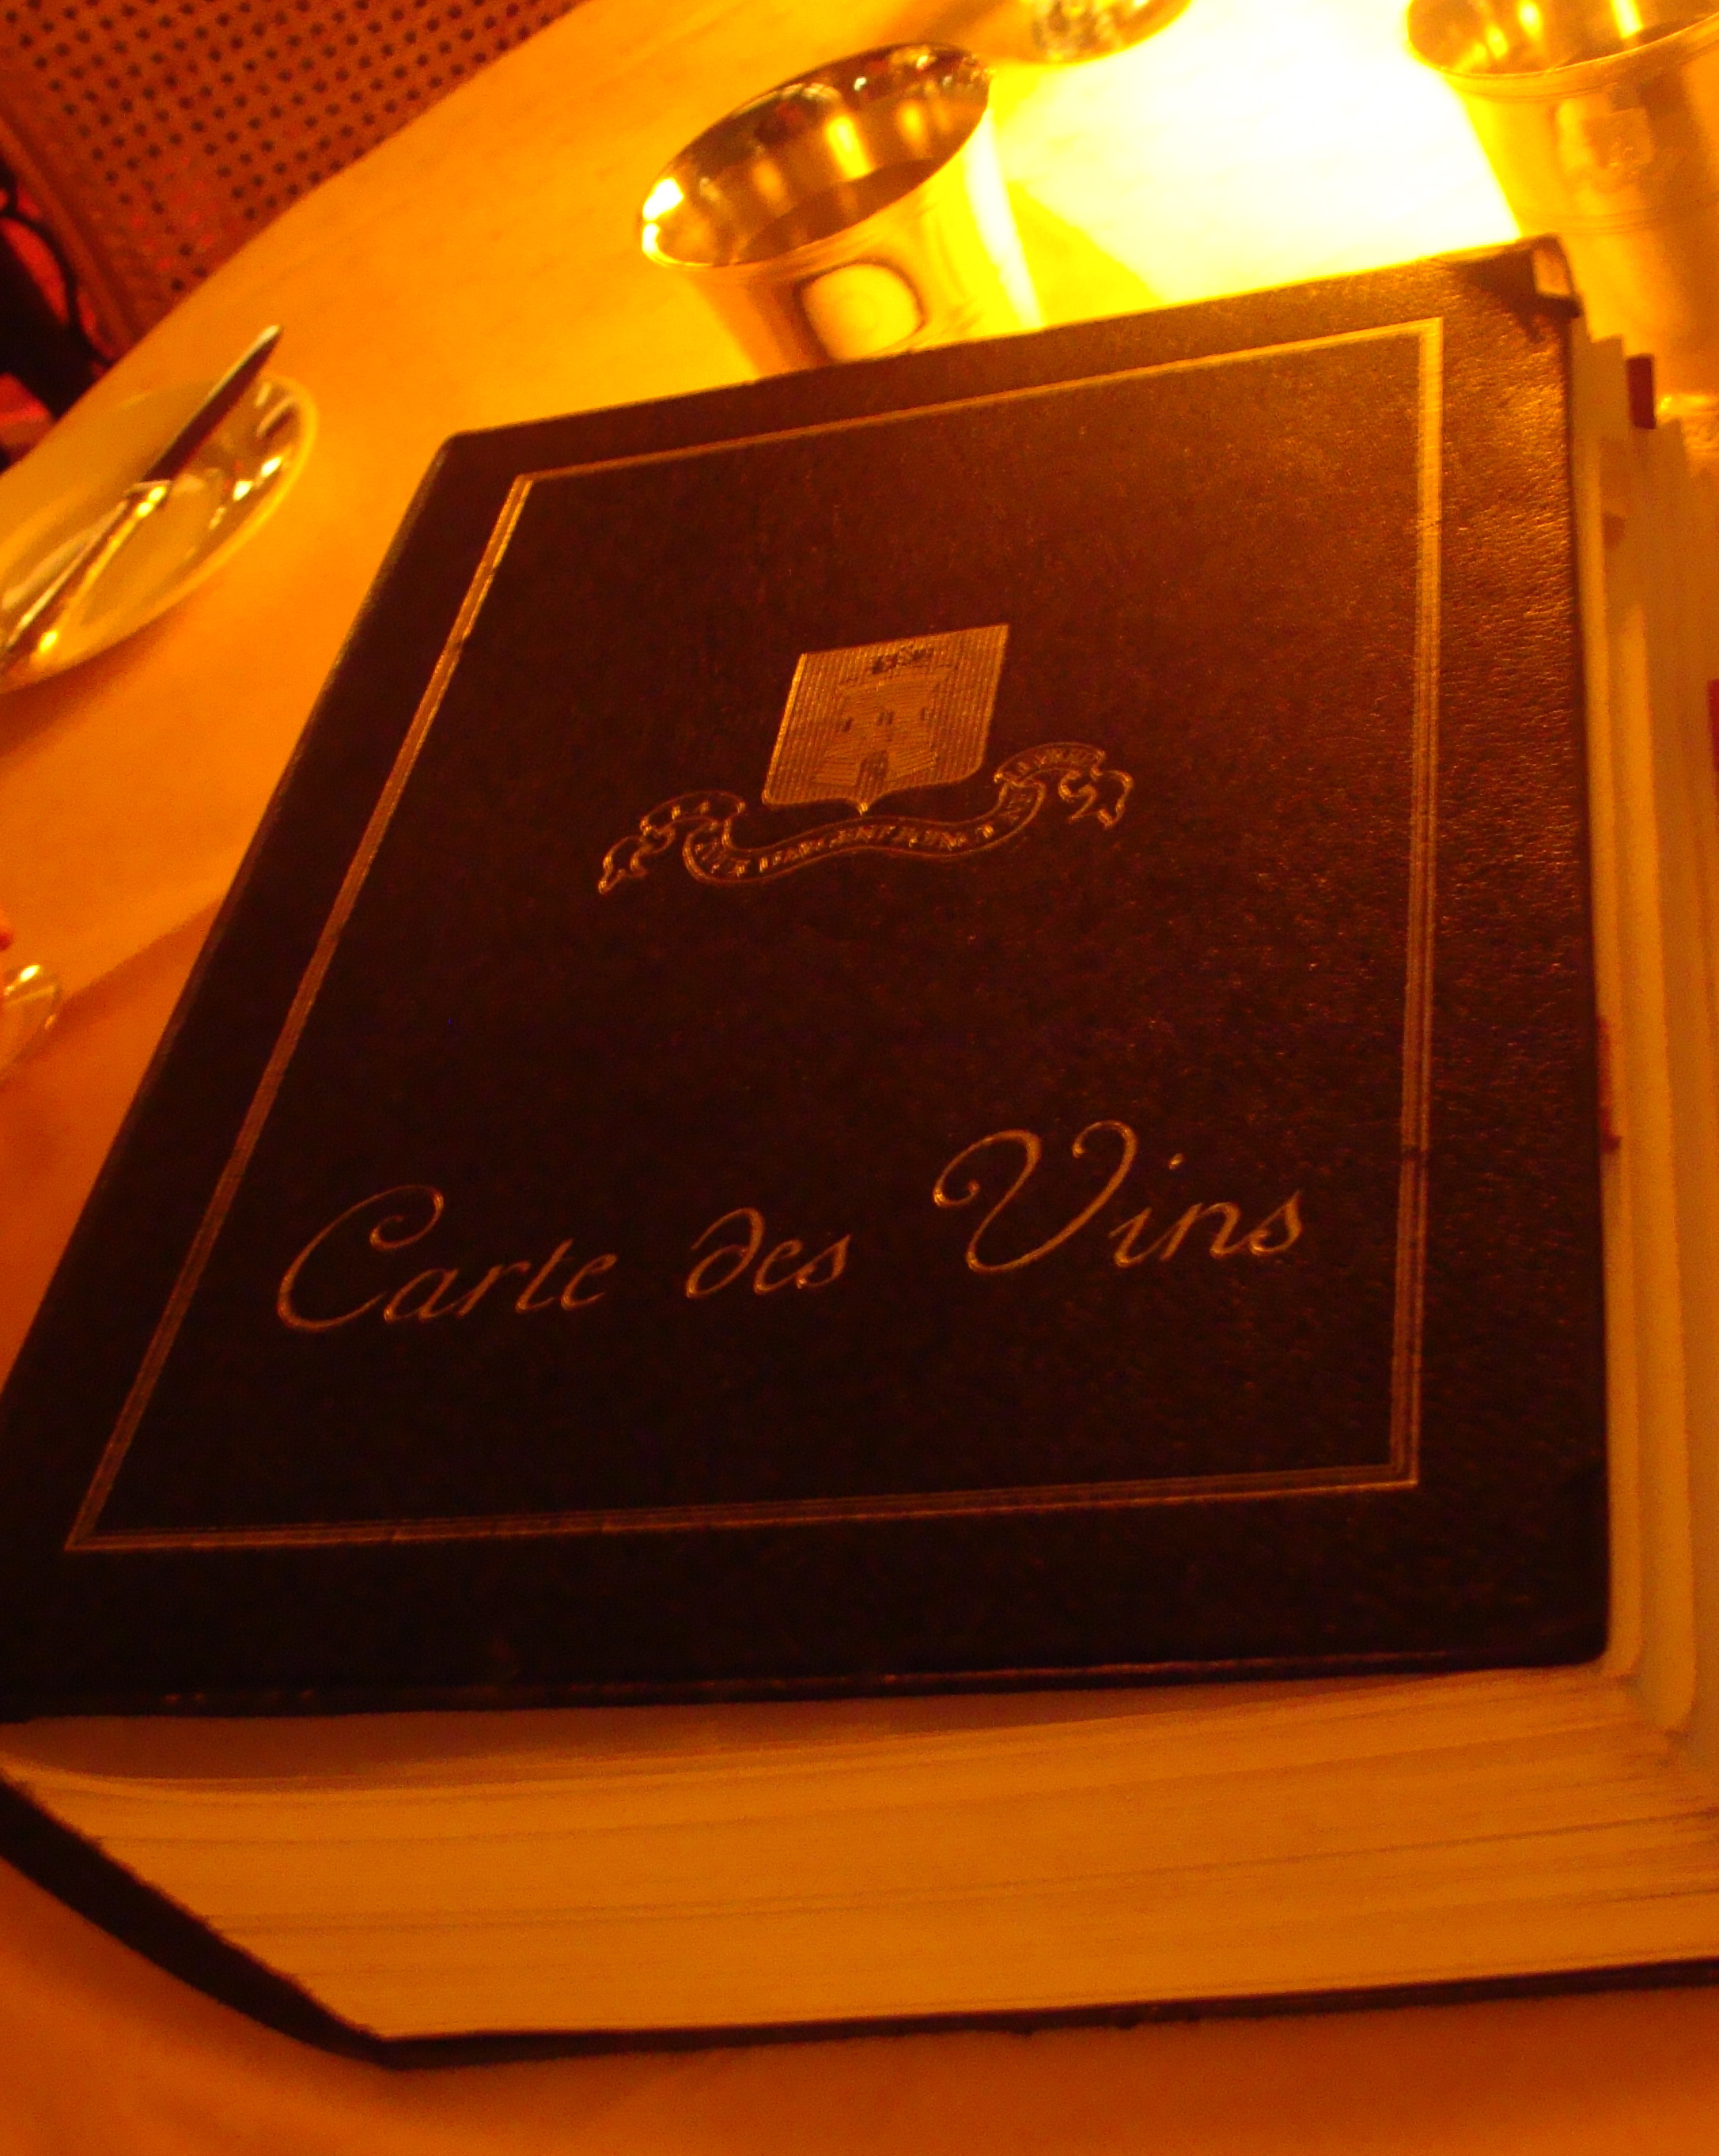 The bible of wine lists